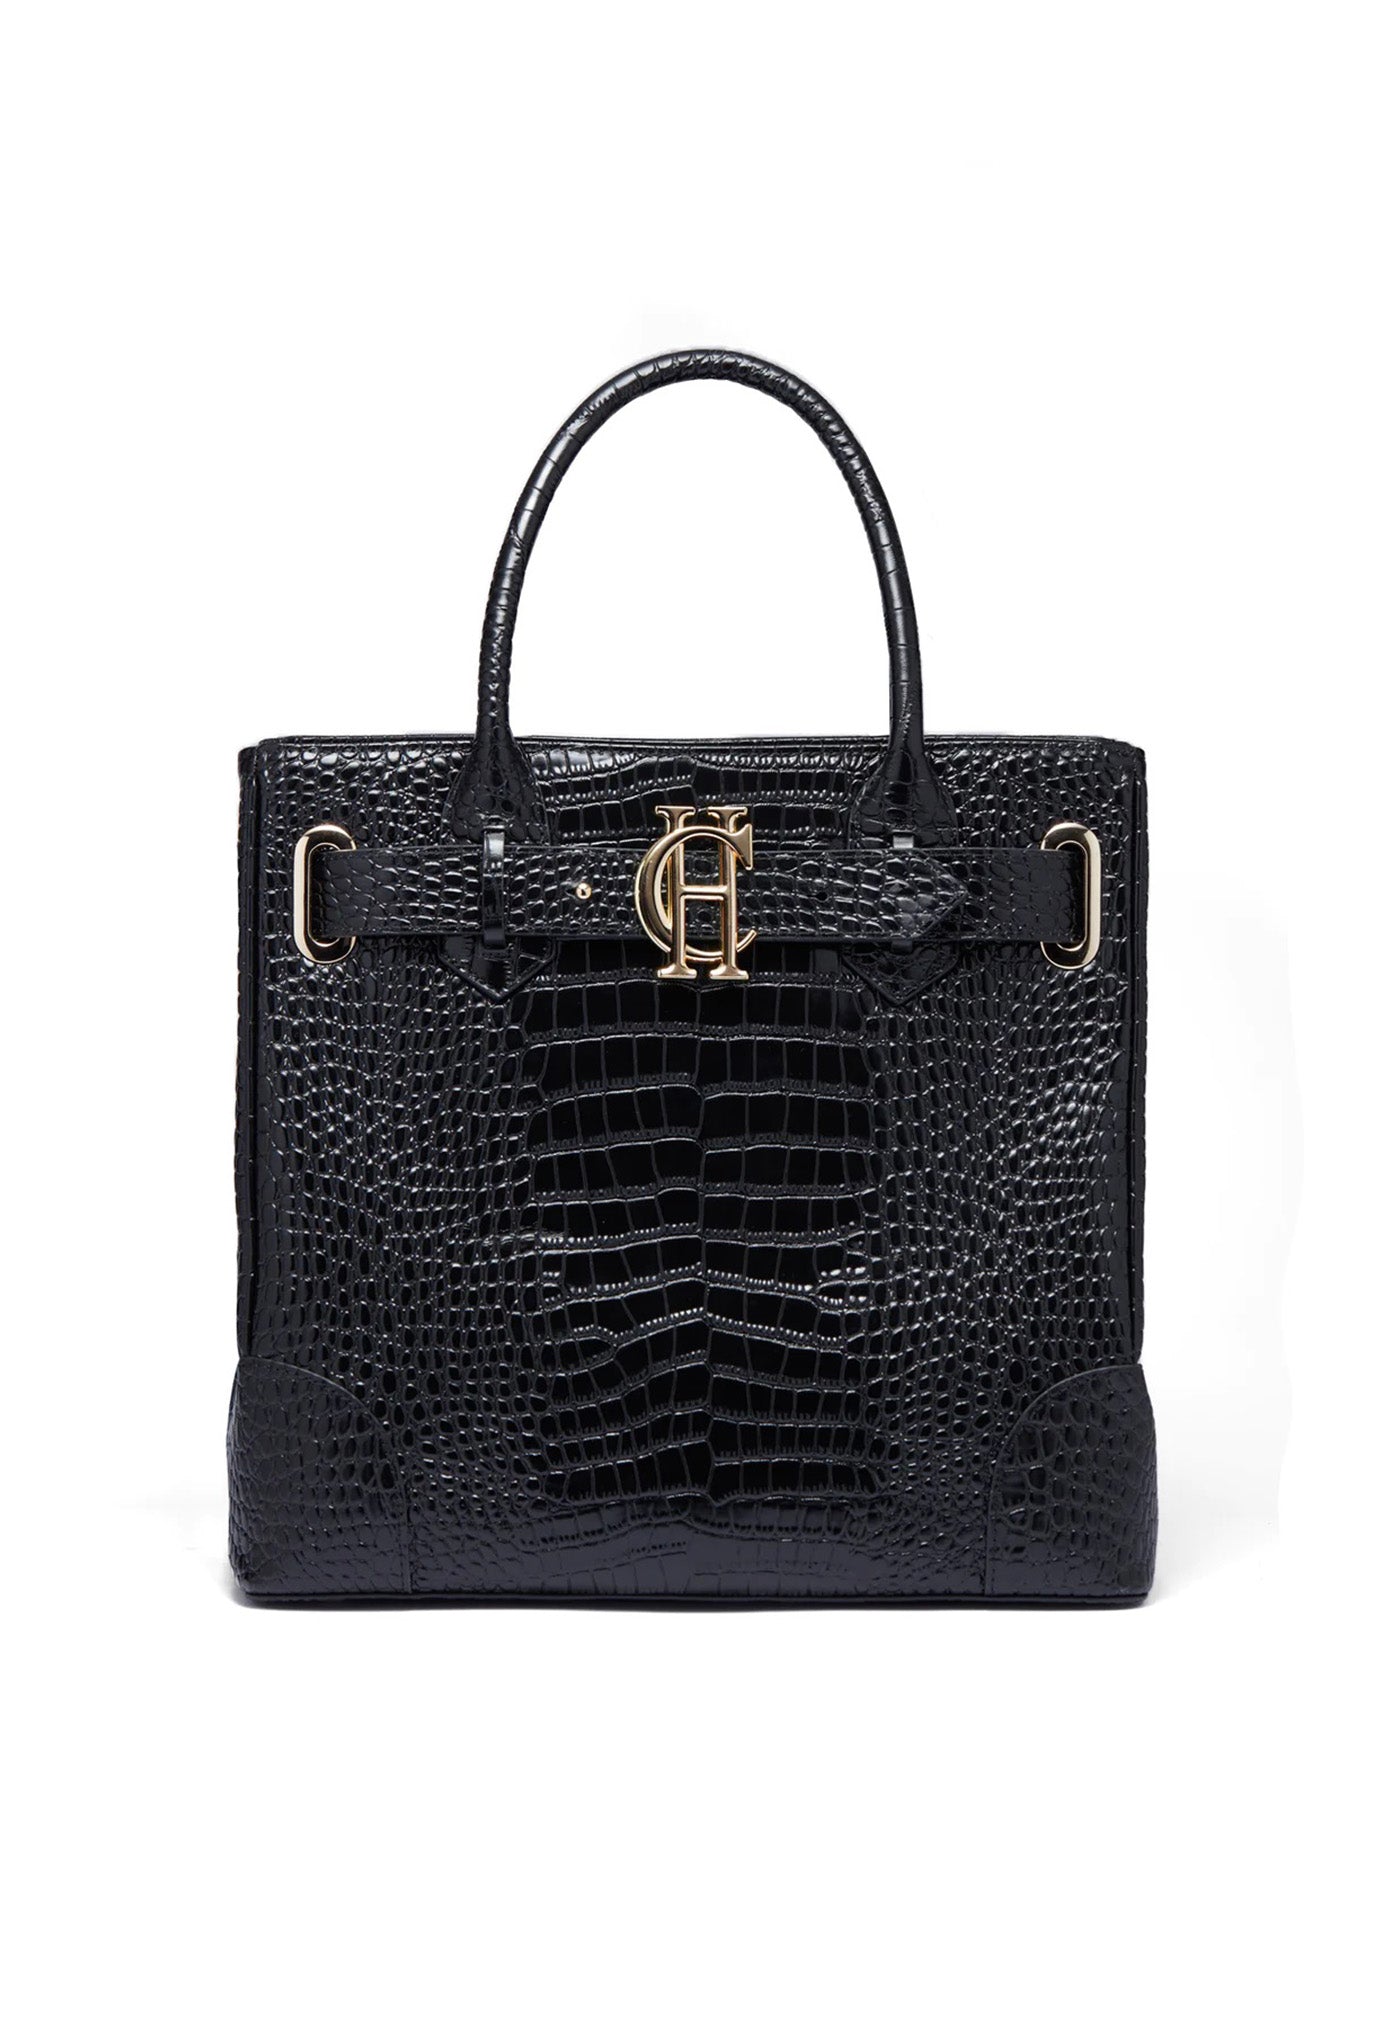 The Brompton Tote - Black Croc sold by Angel Divine